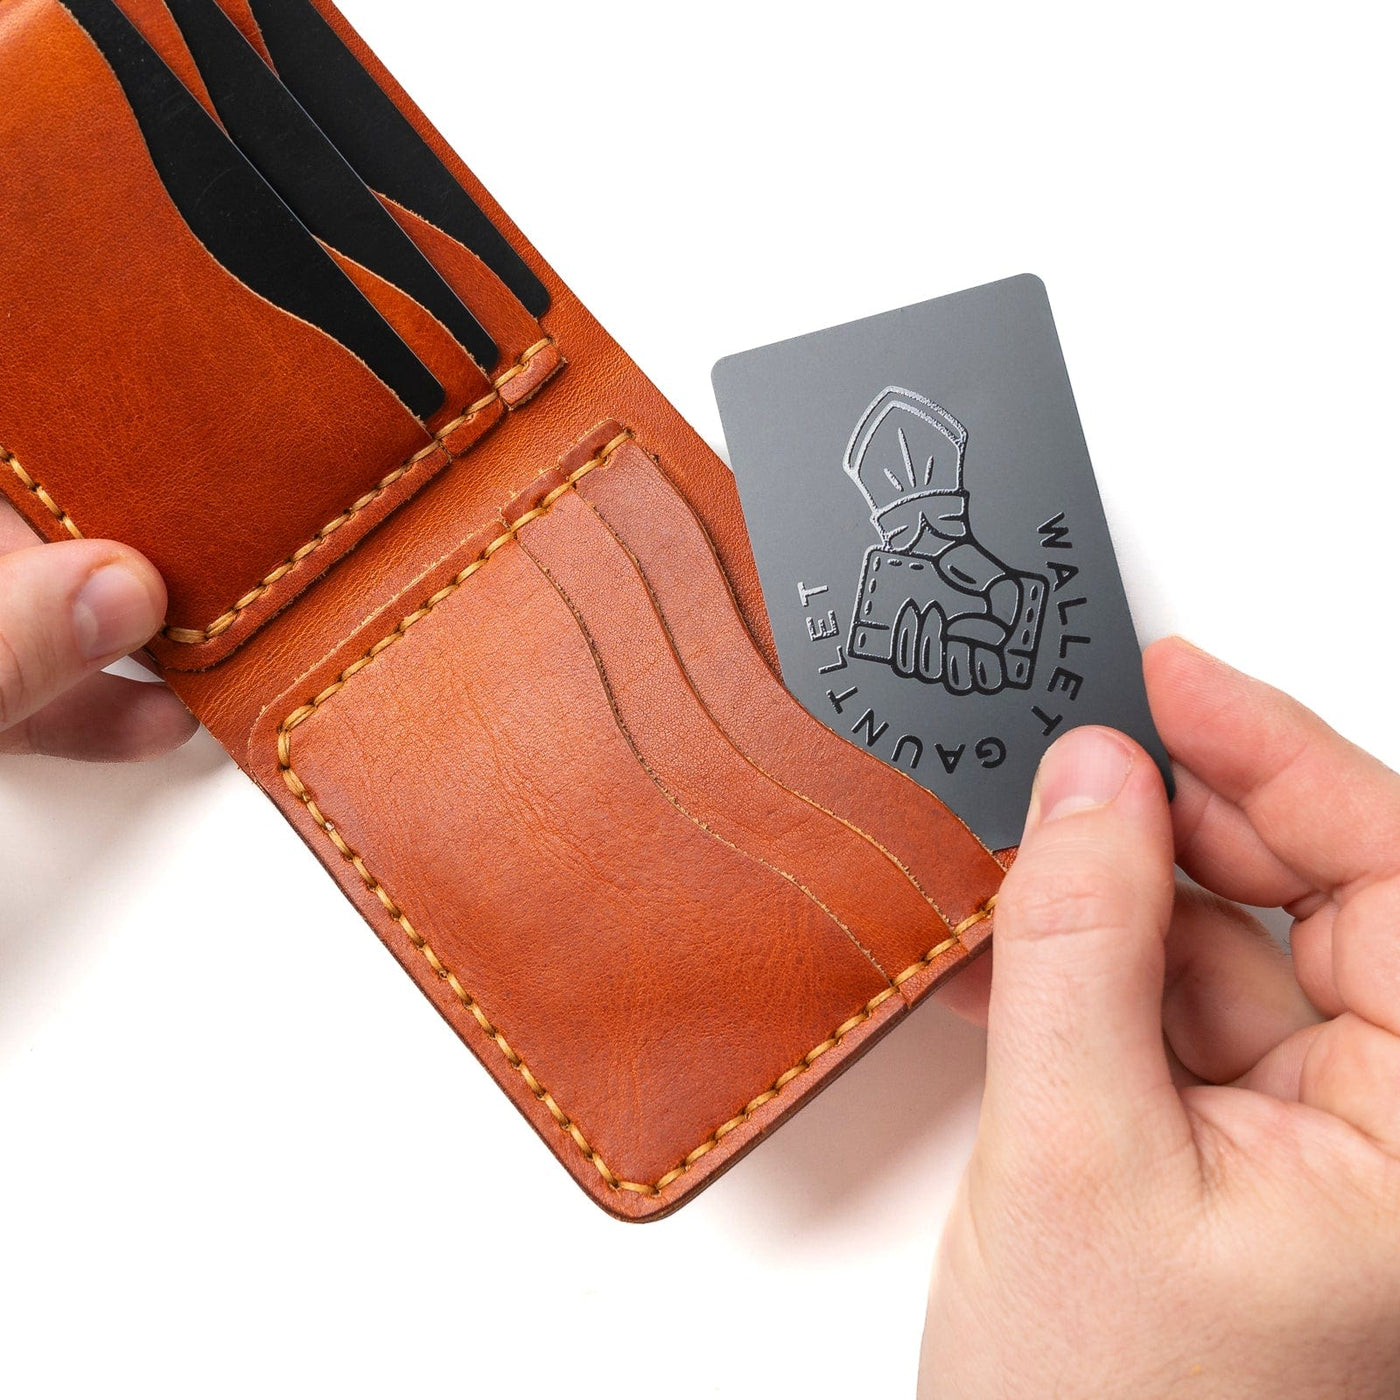 Neck wallet with RFID protection - Skimming protection